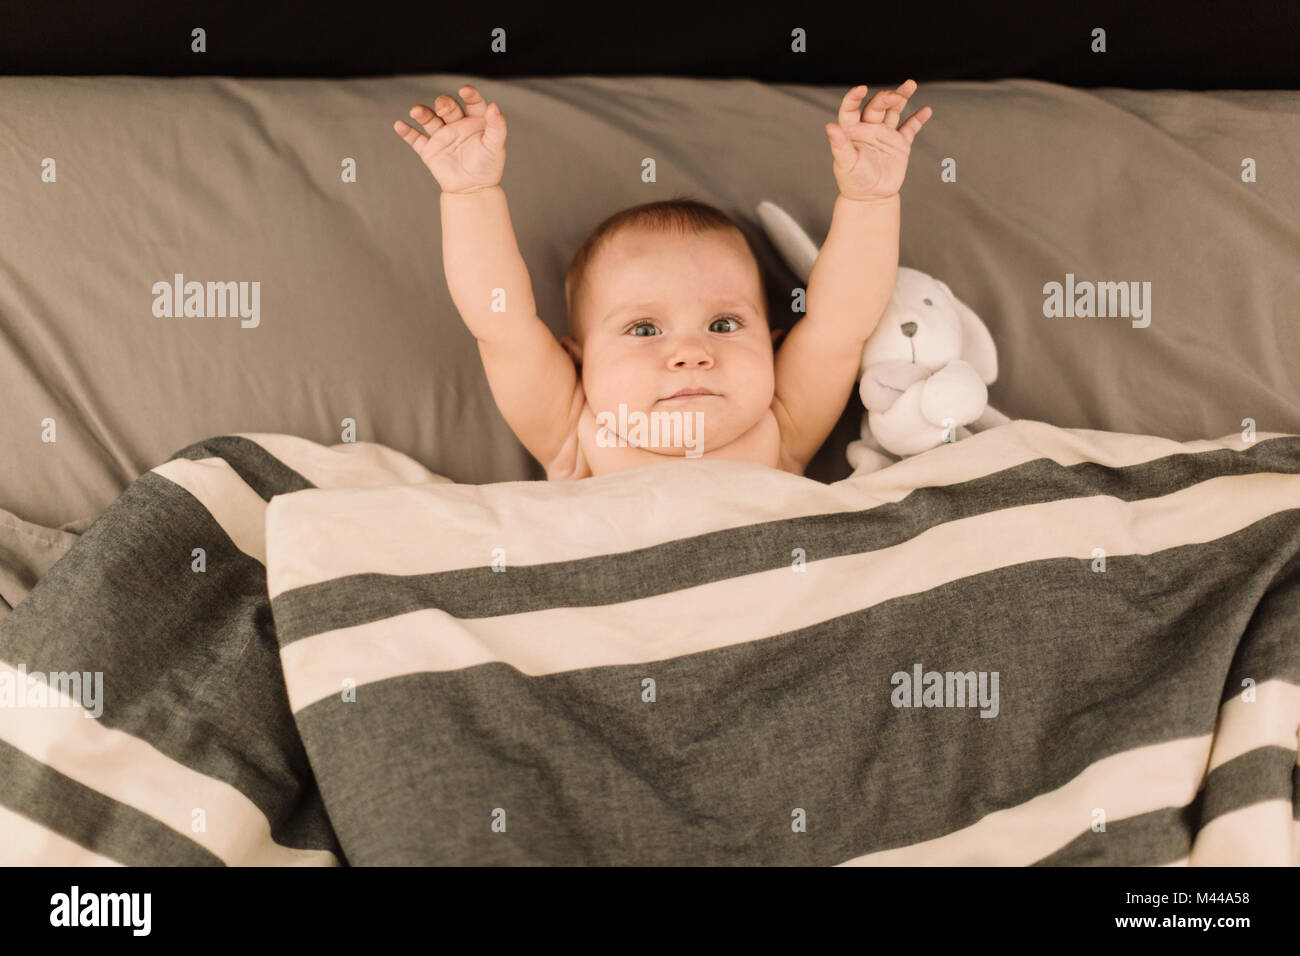 Portrait of baby girl lying in bed with arms raised, overhead view Stock Photo